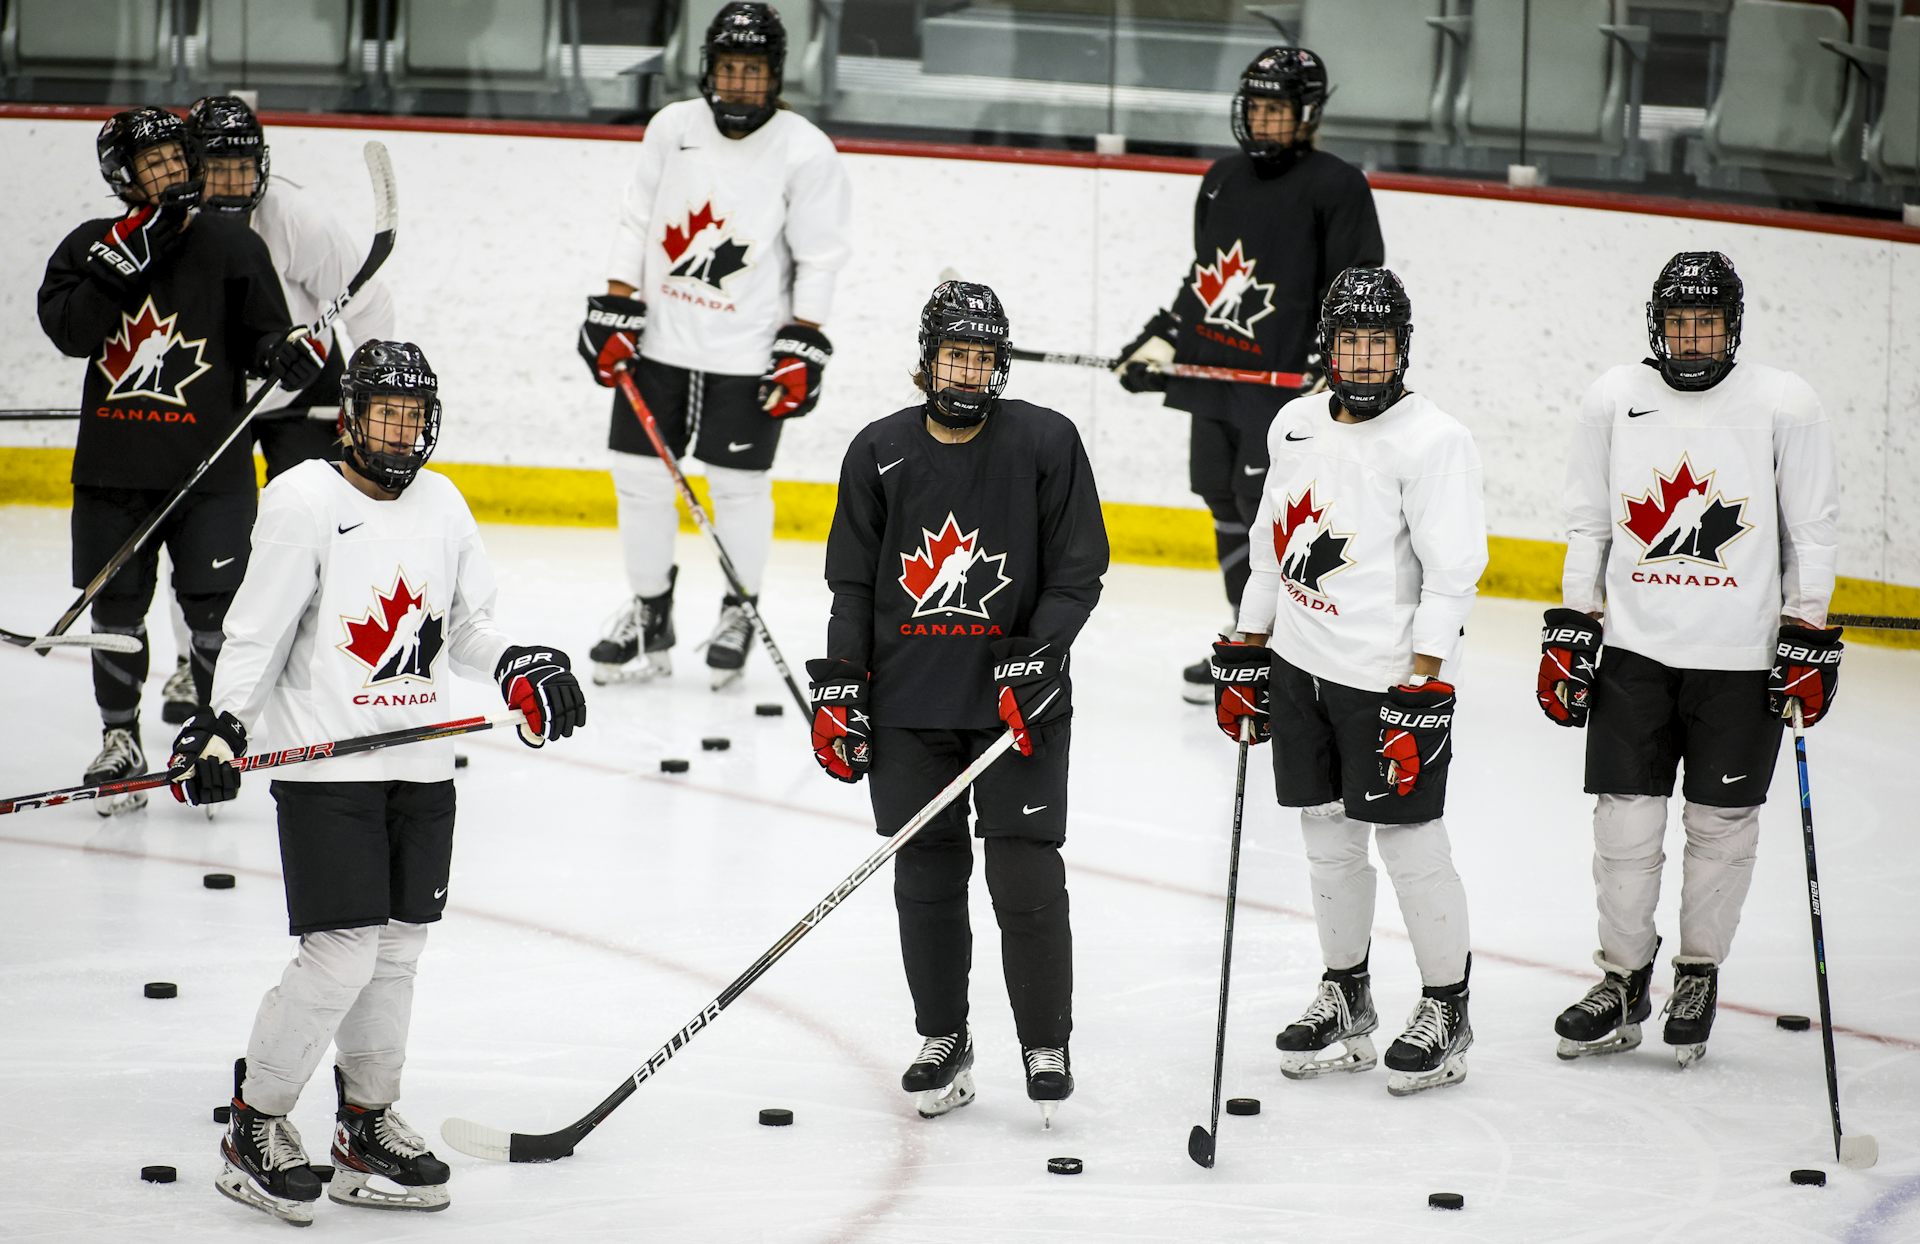 women in hockey gear stand on the rink.